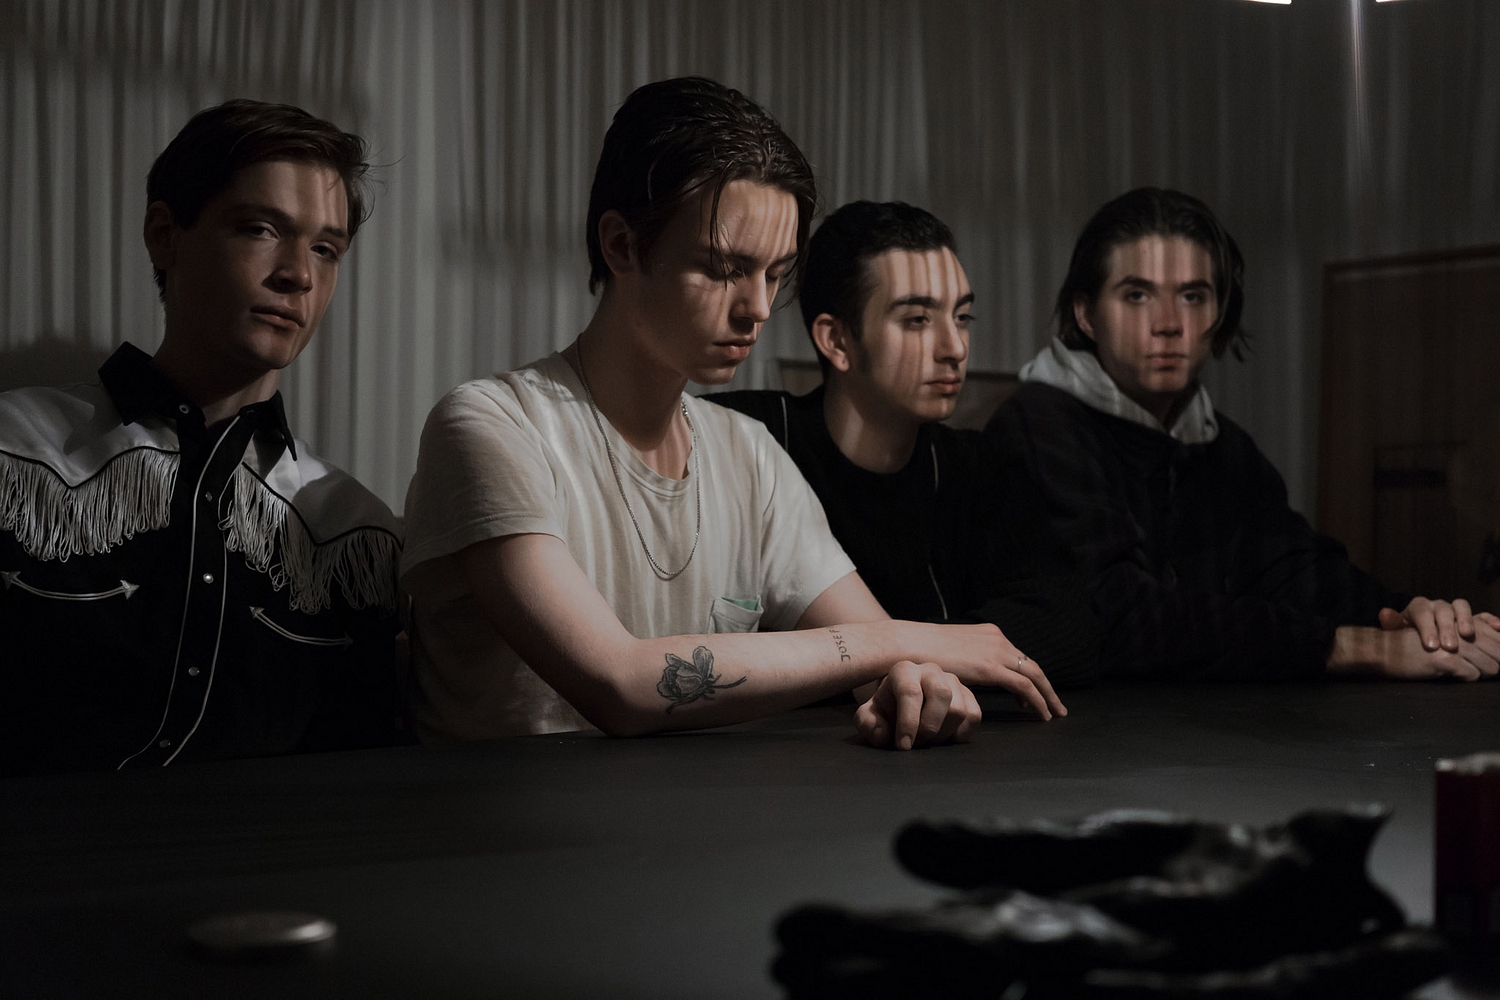 Iceage stream new album ‘Plowing Into the Field of Love’ in full